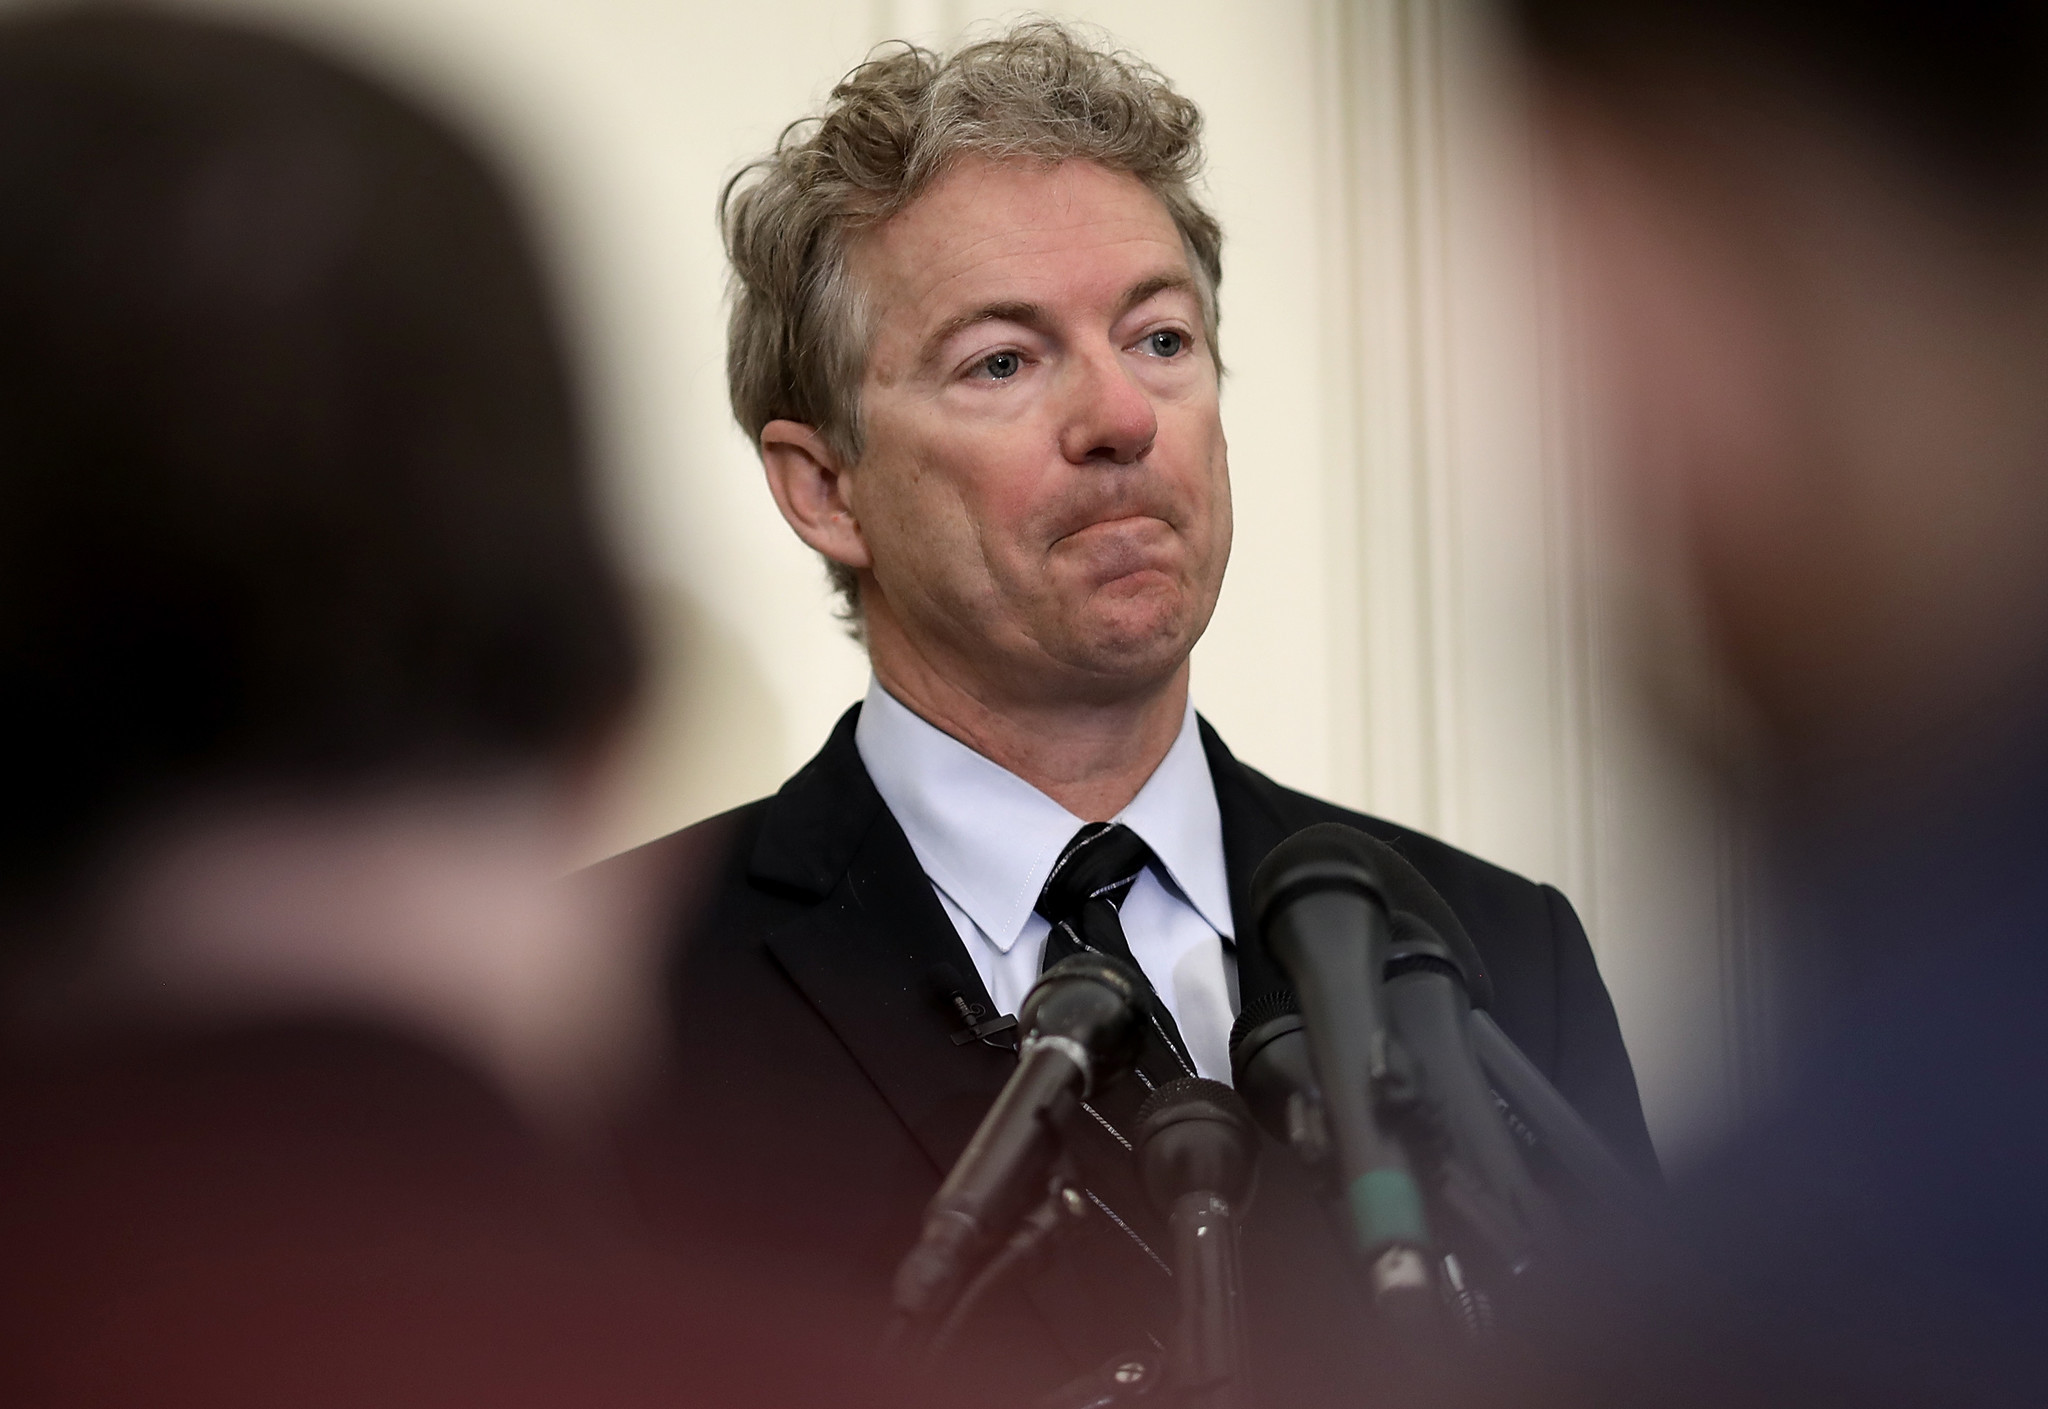 Sen. Rand Paul opposes confirming Trump's secretary of state and CIA nominees ...